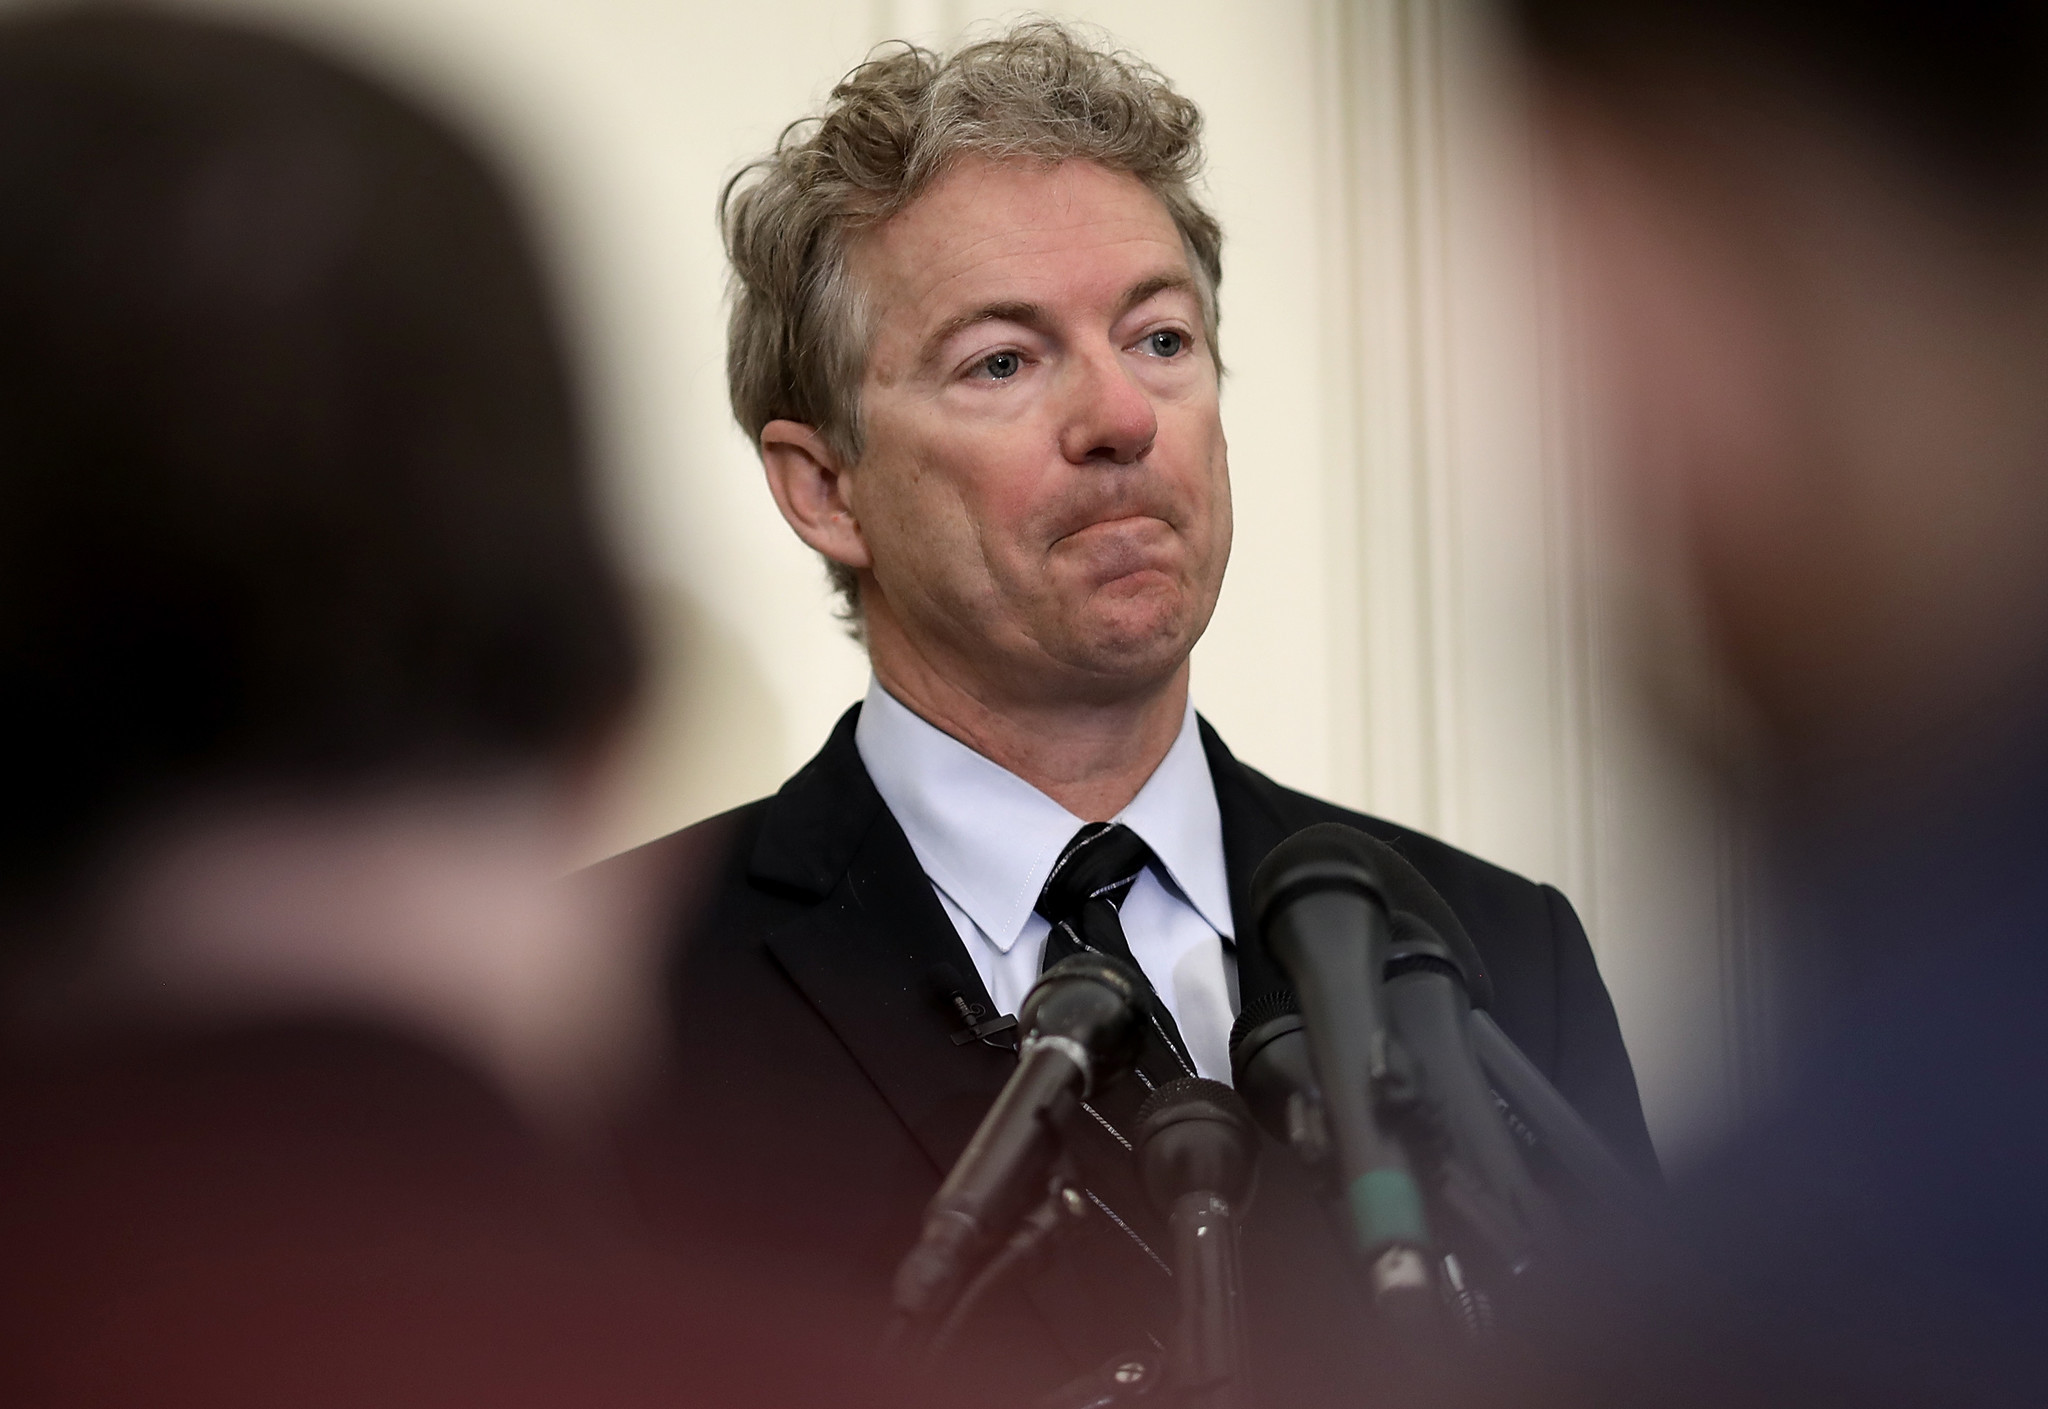 Sen. Rand Paul opposes confirming Trump's secretary of state and CIA nominees ...